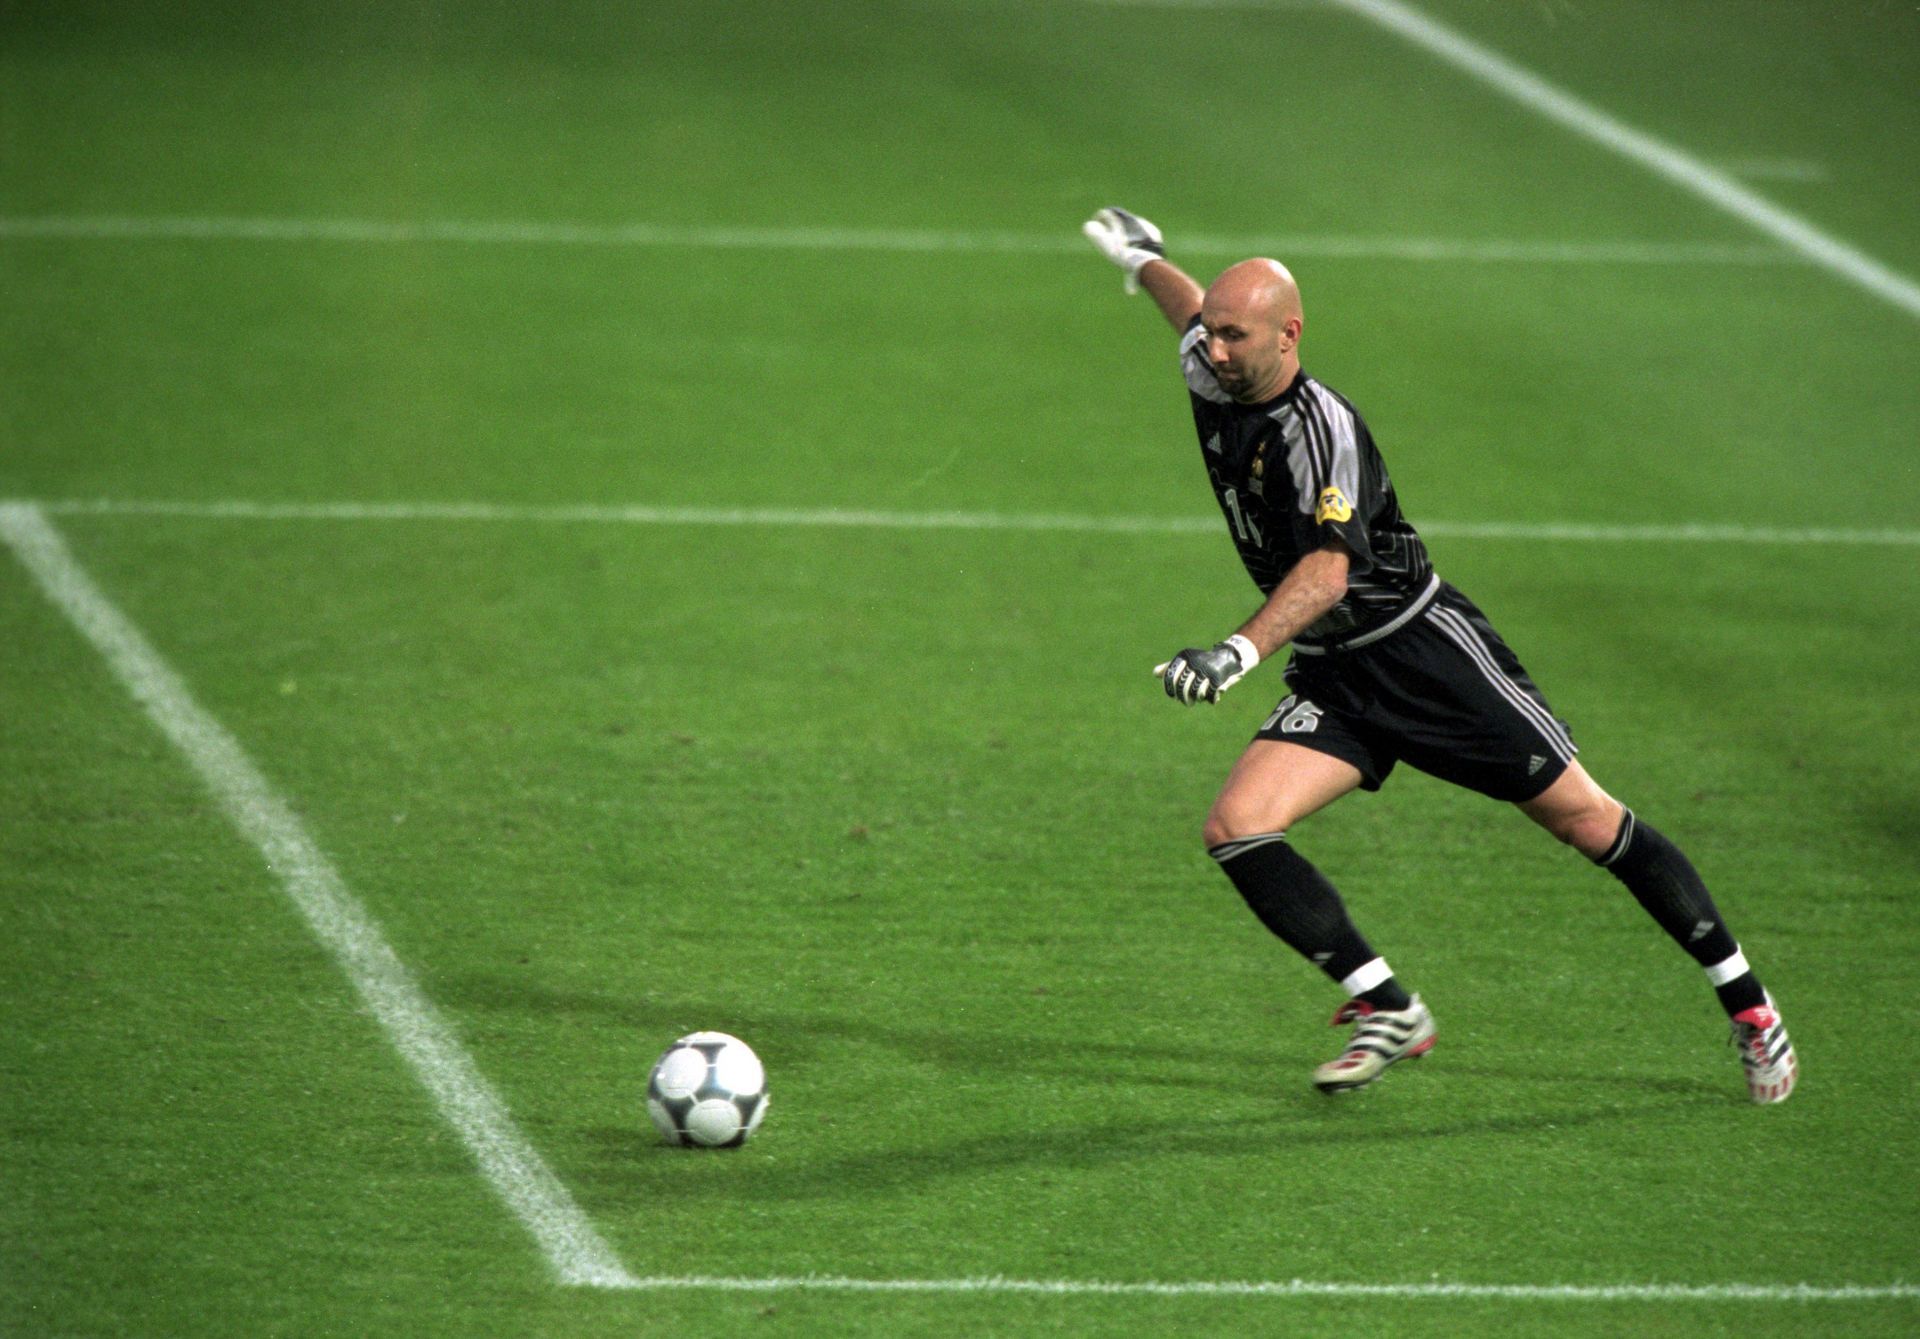 Fabien Barthez in action in the 1998 FIFA World Cup final for France